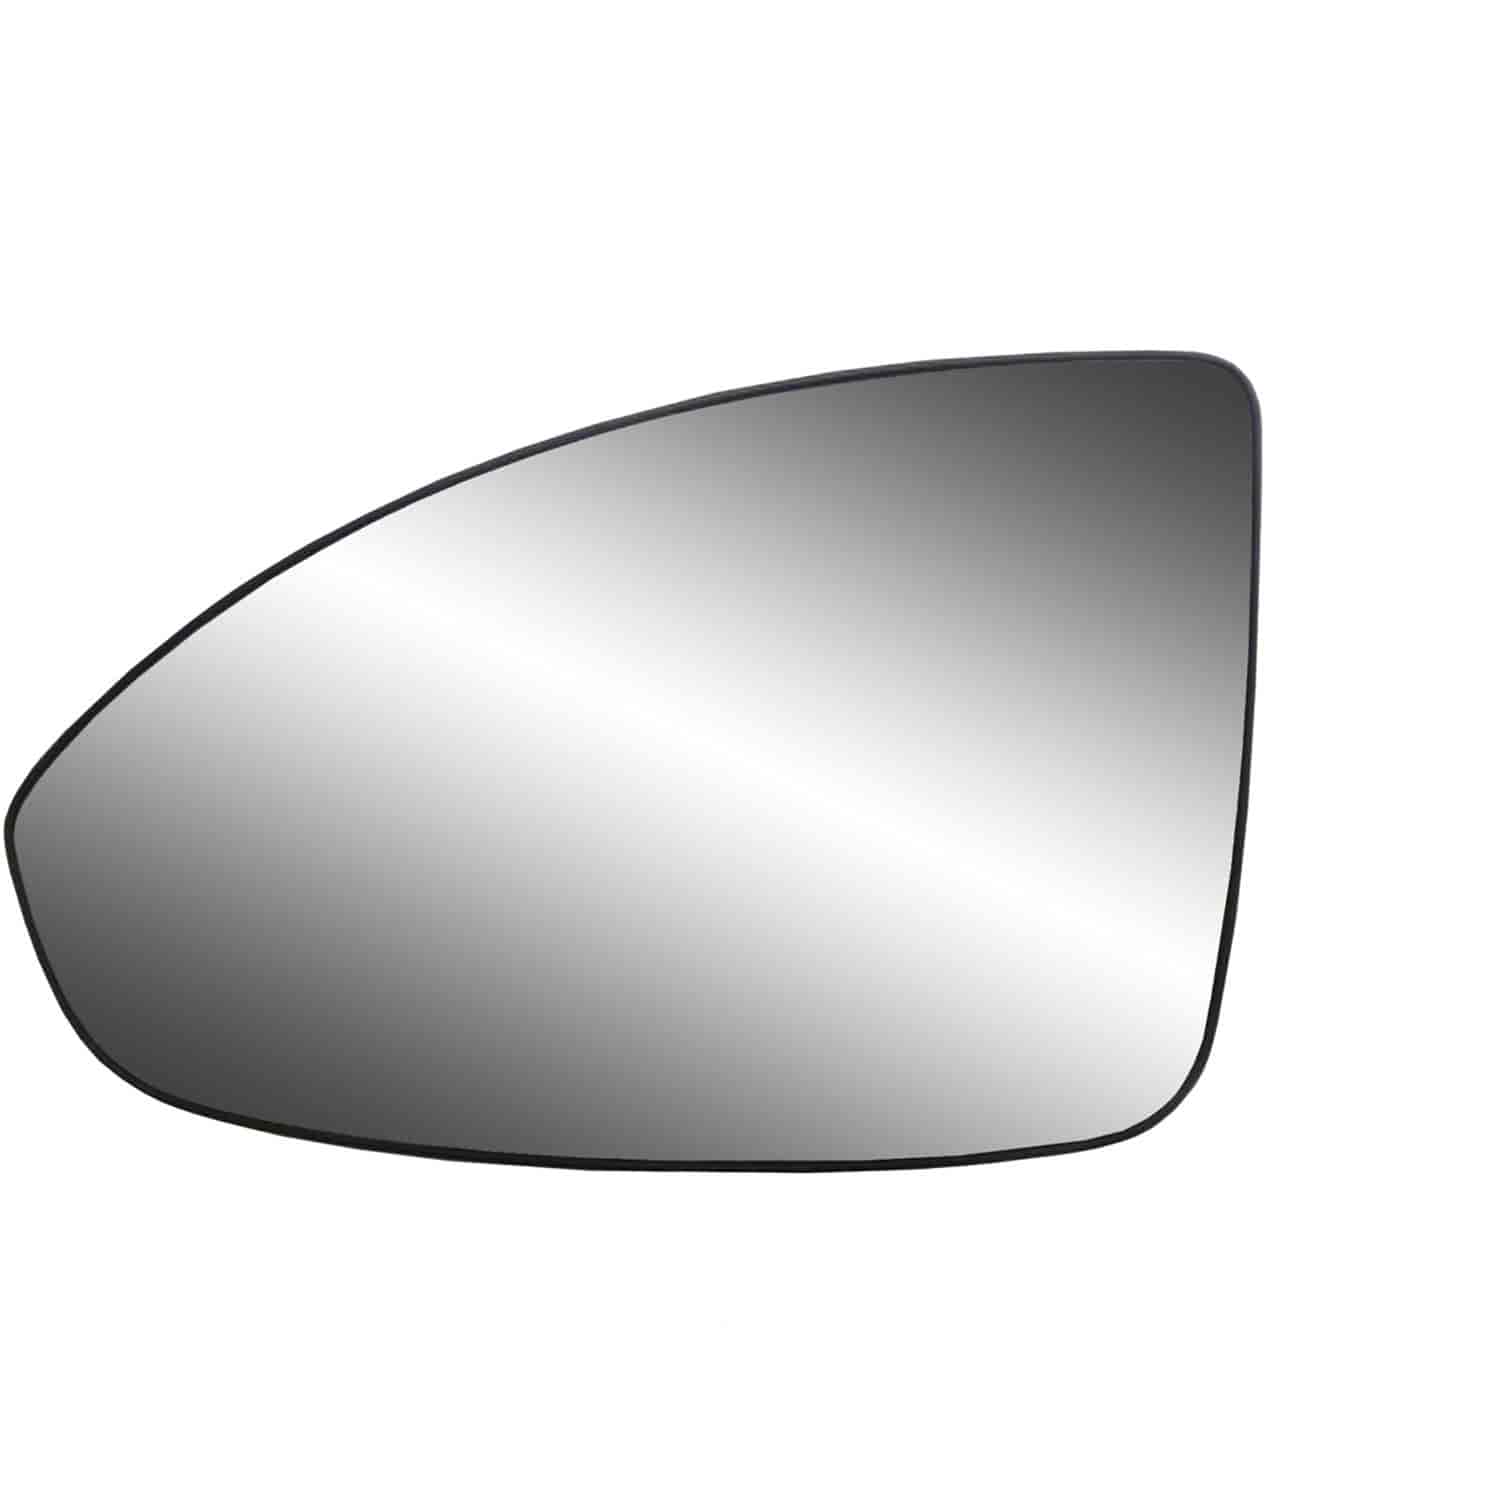 Heated Replacement Glass Assembly for 11-14 Cruze w/o Blind Spot lens replace your cracked or broken